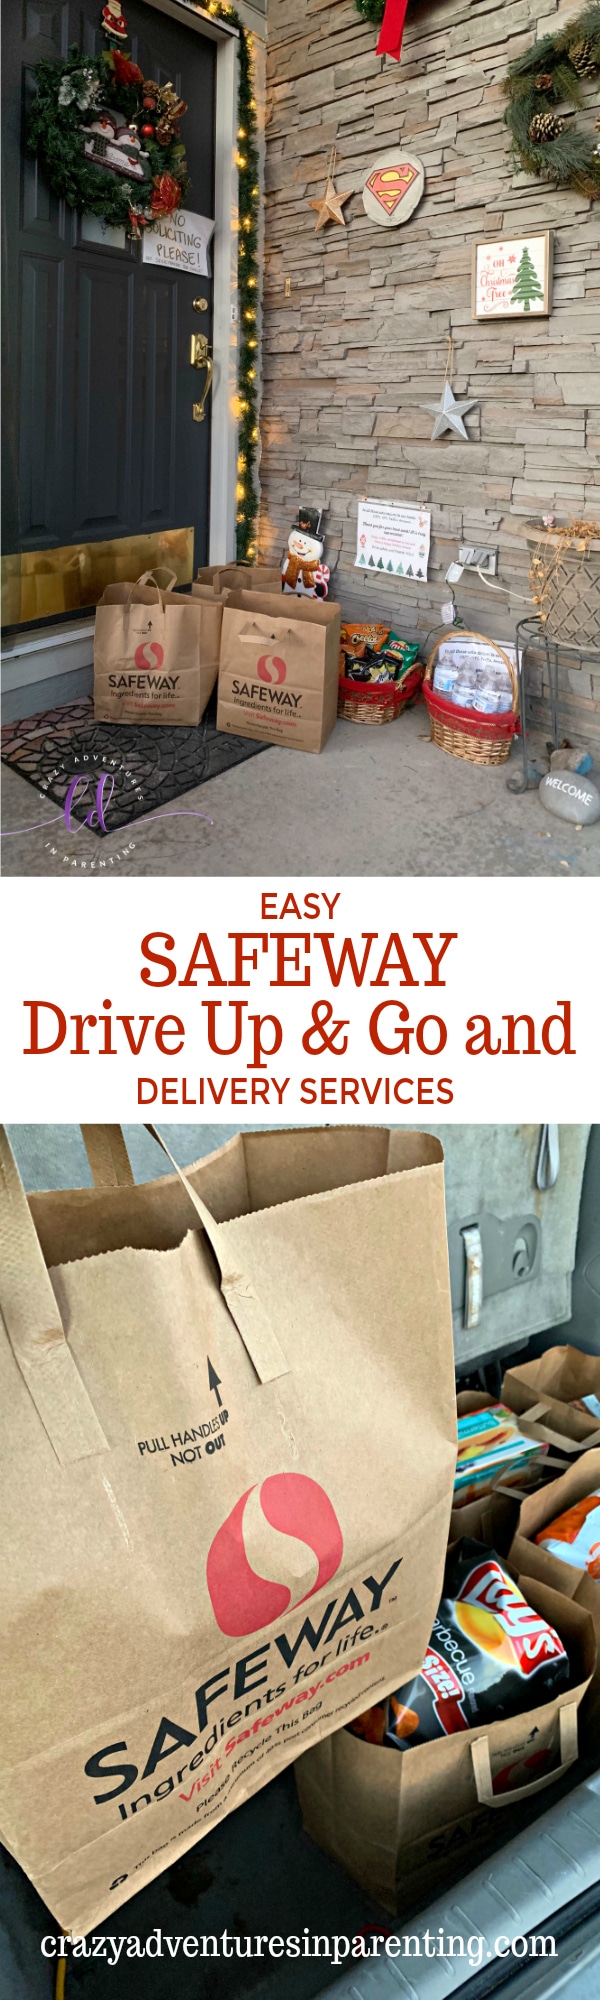 Easy Safeway Drive Up & Go and Delivery Services